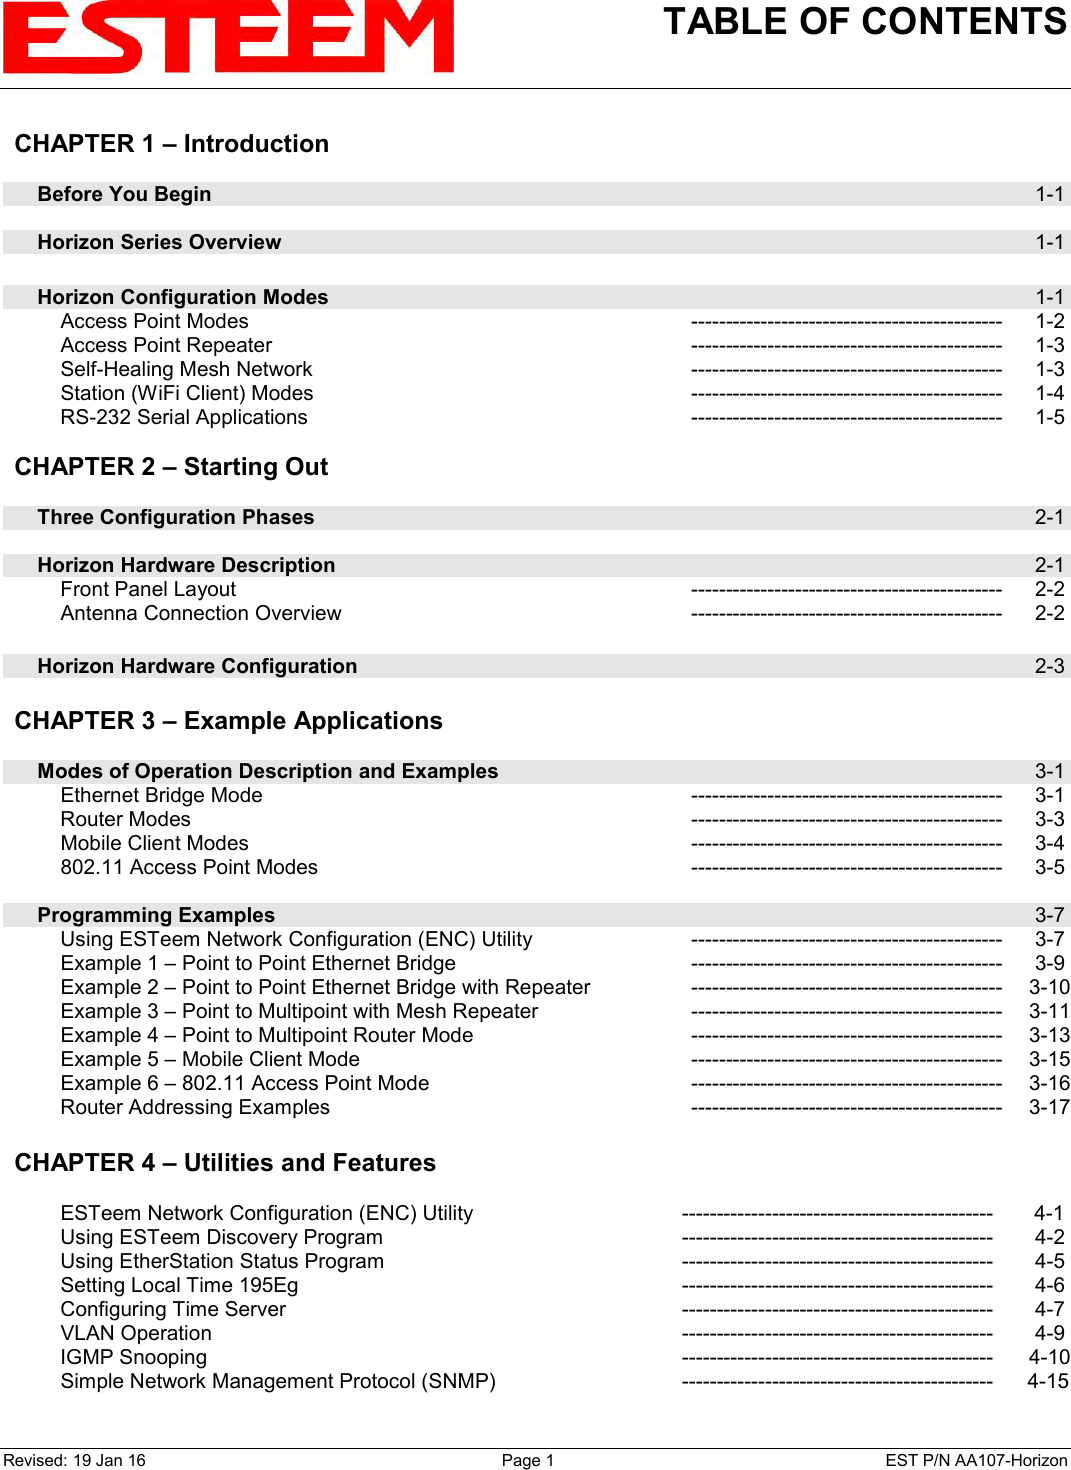 TABLE OF CONTENTS    Revised: 19 Jan 16  Page 1  EST P/N AA107-Horizon CHAPTER 1 – Introduction      Before You Begin  1-1      Horizon Series Overview  1-1        Horizon Configuration Modes  1-1         Access Point Modes --------------------------------------------- 1-2         Access Point Repeater --------------------------------------------- 1-3         Self-Healing Mesh Network --------------------------------------------- 1-3         Station (WiFi Client) Modes --------------------------------------------- 1-4         RS-232 Serial Applications --------------------------------------------- 1-5    CHAPTER 2 – Starting Out          Three Configuration Phases  2-1        Horizon Hardware Description  2-1         Front Panel Layout --------------------------------------------- 2-2         Antenna Connection Overview --------------------------------------------- 2-2        Horizon Hardware Configuration  2-3    CHAPTER 3 – Example Applications          Modes of Operation Description and Examples  3-1         Ethernet Bridge Mode --------------------------------------------- 3-1         Router Modes --------------------------------------------- 3-3         Mobile Client Modes --------------------------------------------- 3-4         802.11 Access Point Modes --------------------------------------------- 3-5        Programming Examples  3-7         Using ESTeem Network Configuration (ENC) Utility --------------------------------------------- 3-7         Example 1 – Point to Point Ethernet Bridge --------------------------------------------- 3-9         Example 2 – Point to Point Ethernet Bridge with Repeater --------------------------------------------- 3-10         Example 3 – Point to Multipoint with Mesh Repeater --------------------------------------------- 3-11         Example 4 – Point to Multipoint Router Mode --------------------------------------------- 3-13         Example 5 – Mobile Client Mode --------------------------------------------- 3-15         Example 6 – 802.11 Access Point Mode --------------------------------------------- 3-16         Router Addressing Examples  --------------------------------------------- 3-17   CHAPTER 4 – Utilities and Features             ESTeem Network Configuration (ENC) Utility ---------------------------------------------  4-1         Using ESTeem Discovery Program --------------------------------------------- 4-2         Using EtherStation Status Program --------------------------------------------- 4-5         Setting Local Time 195Eg --------------------------------------------- 4-6         Configuring Time Server --------------------------------------------- 4-7         VLAN Operation --------------------------------------------- 4-9         IGMP Snooping --------------------------------------------- 4-10         Simple Network Management Protocol (SNMP) ---------------------------------------------  4-15    